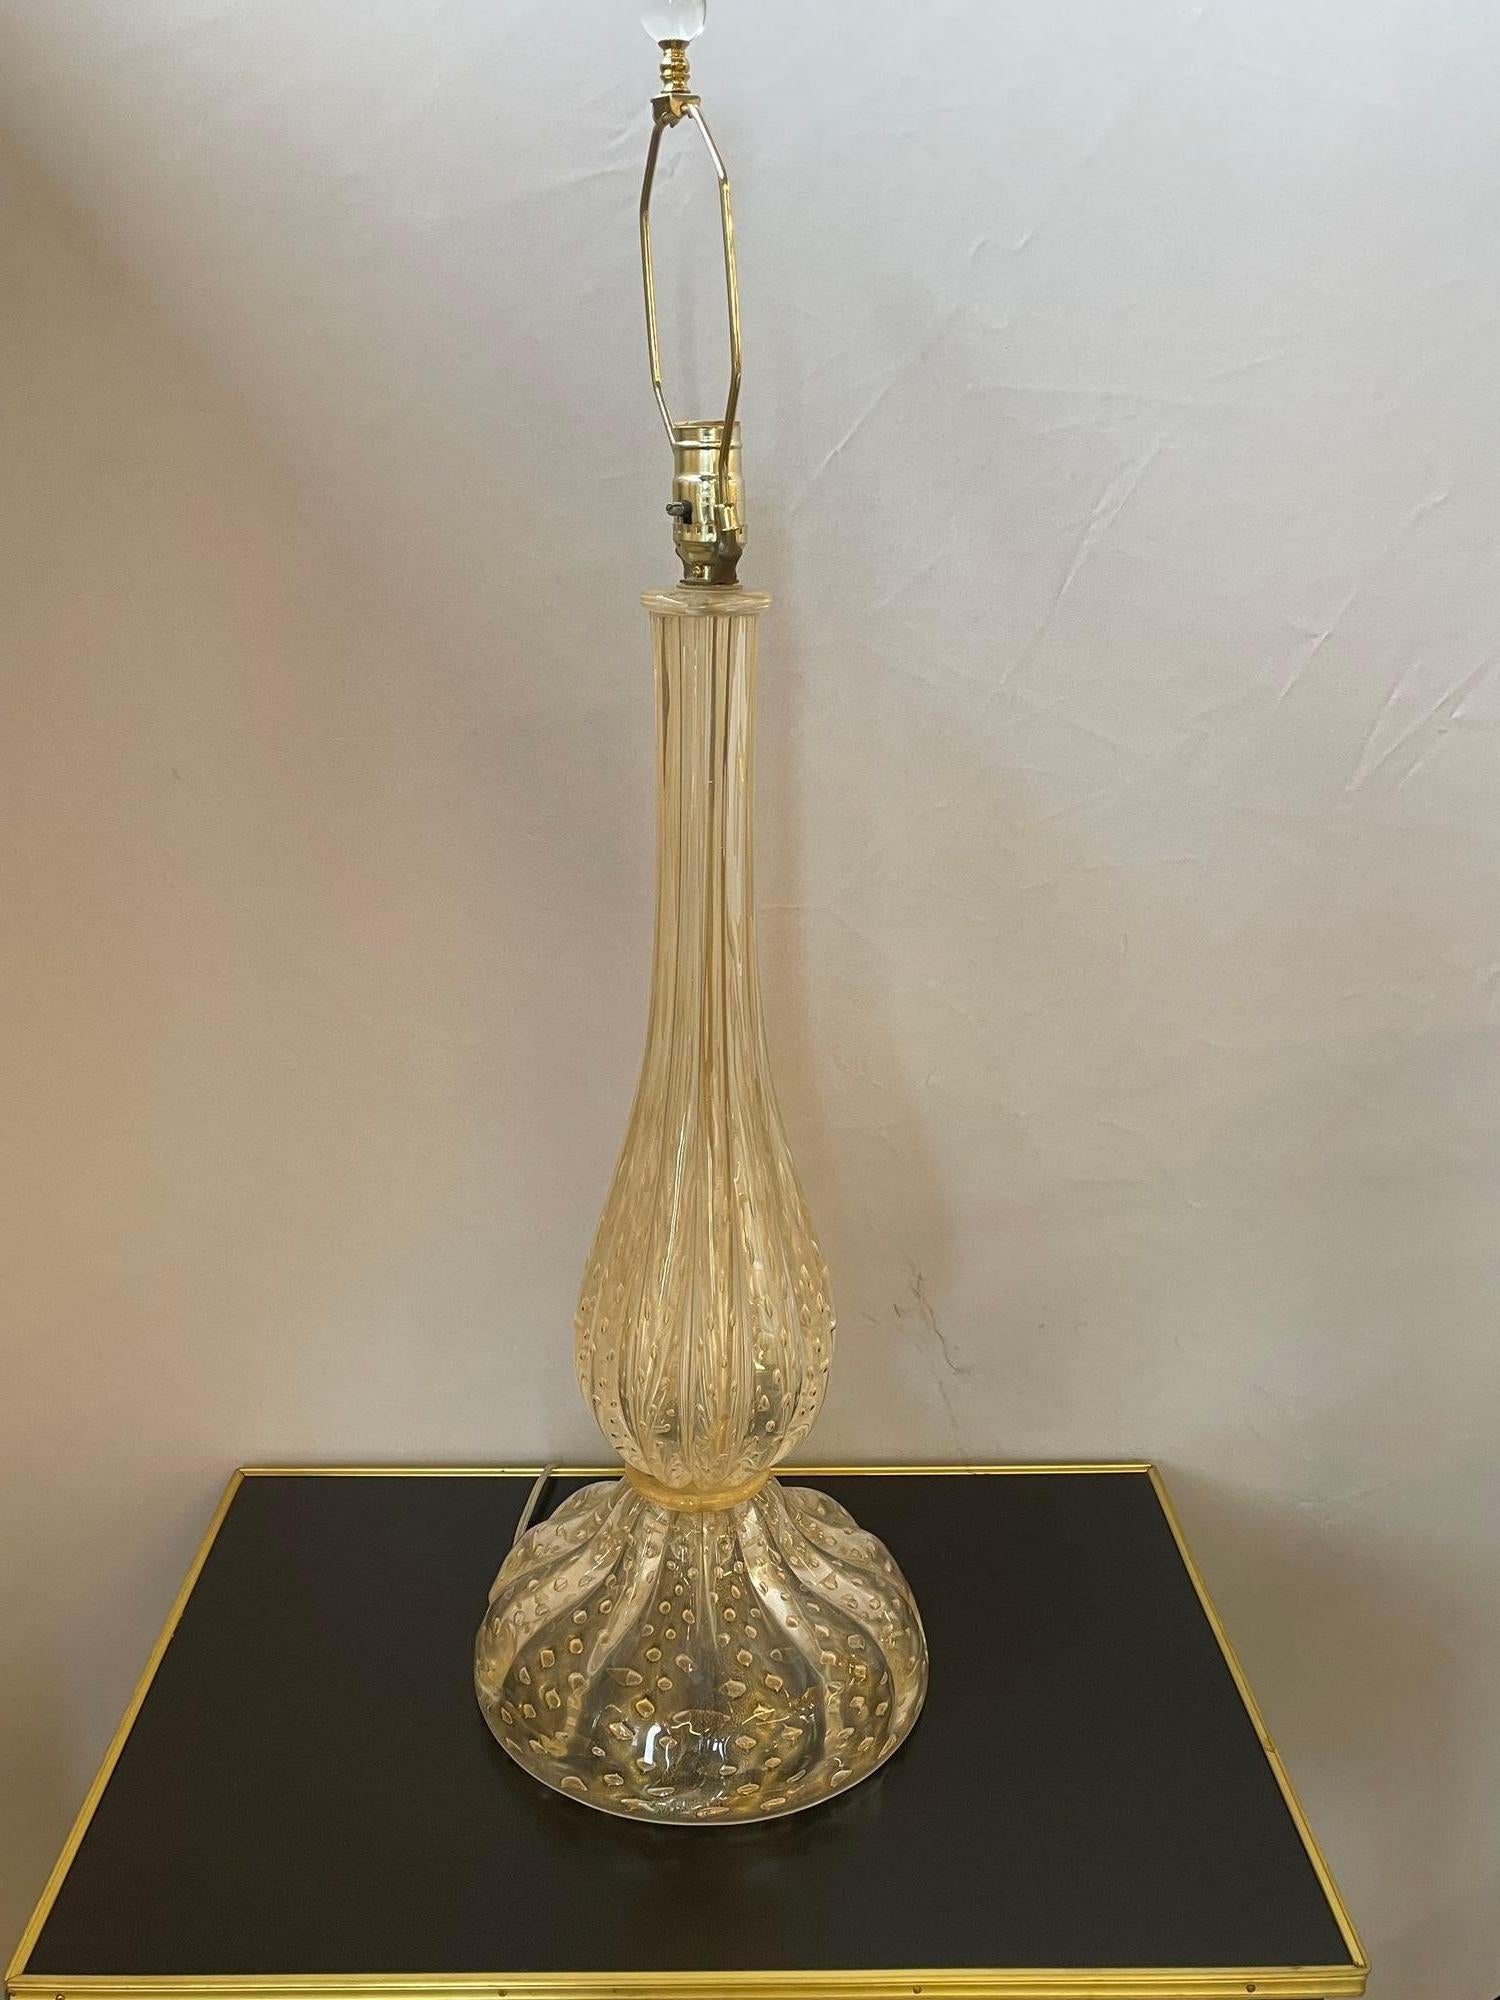 Mid-20th Century Large Italian Murano Glass Table Lamp, Mid-Century Modern, Barovier Toso Style For Sale